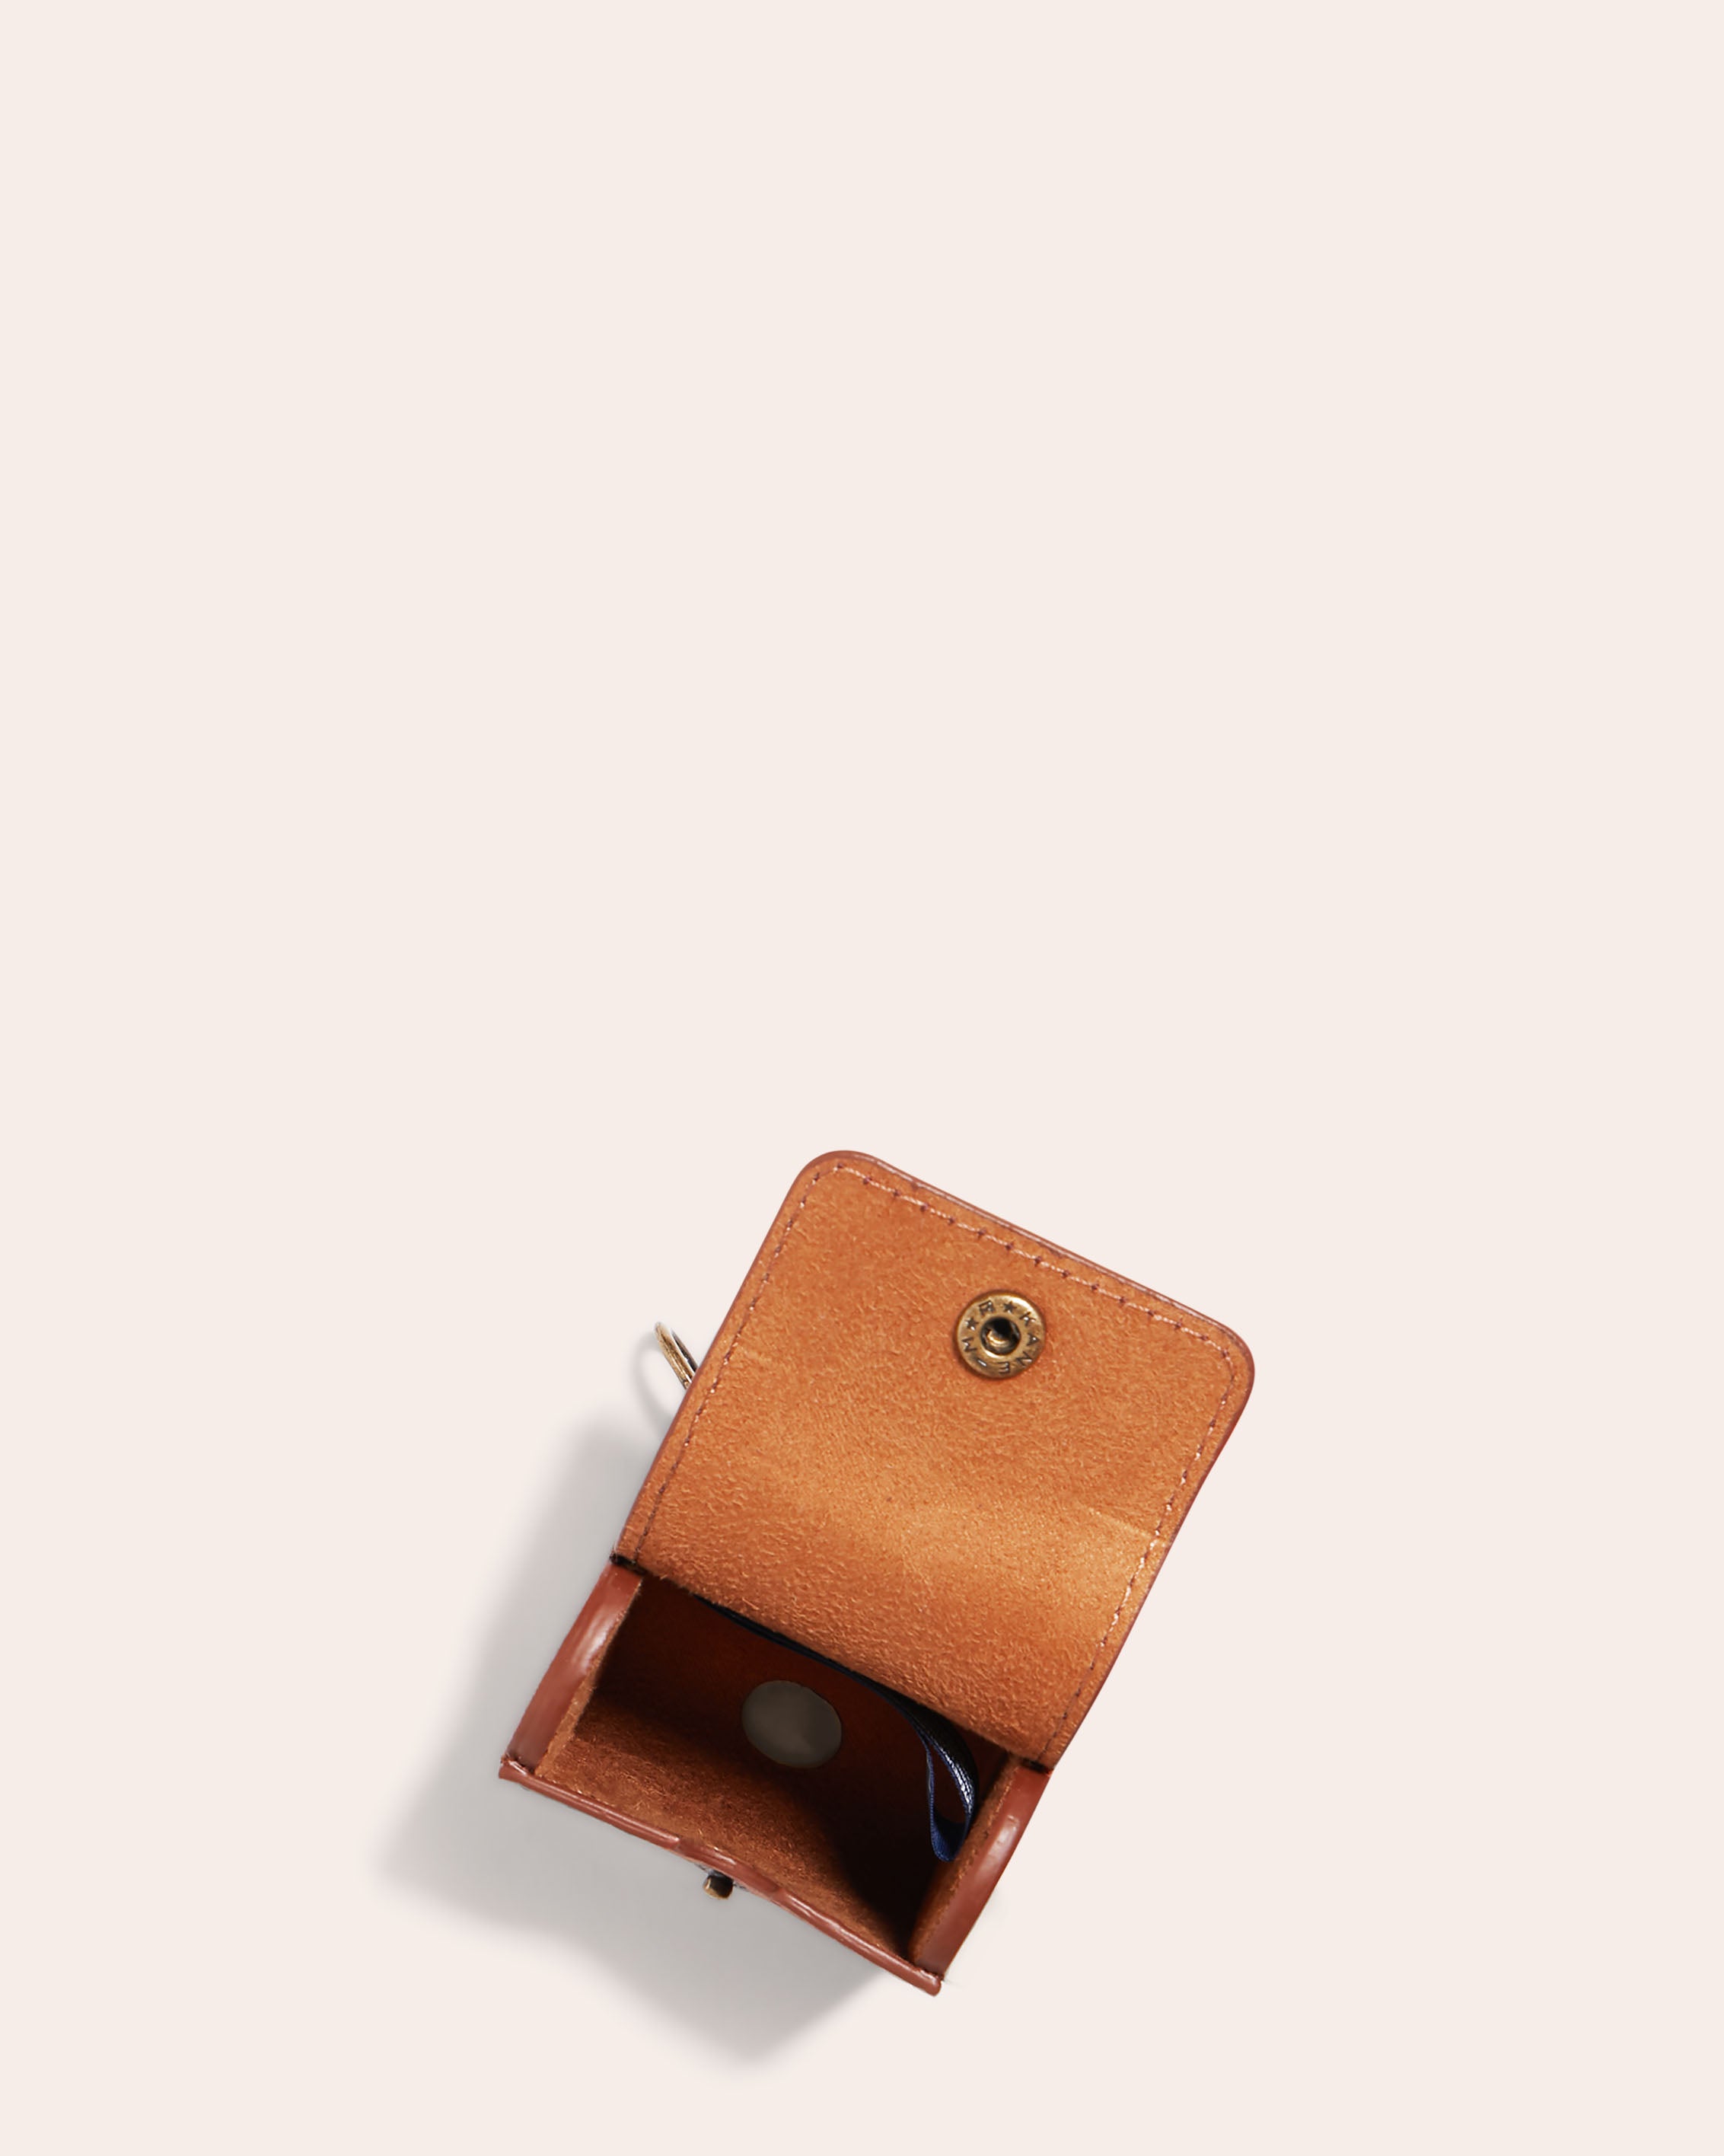 Flagstaff Airpod Case | Cafe Latte | Fine Leather Goods | American Leather Co.